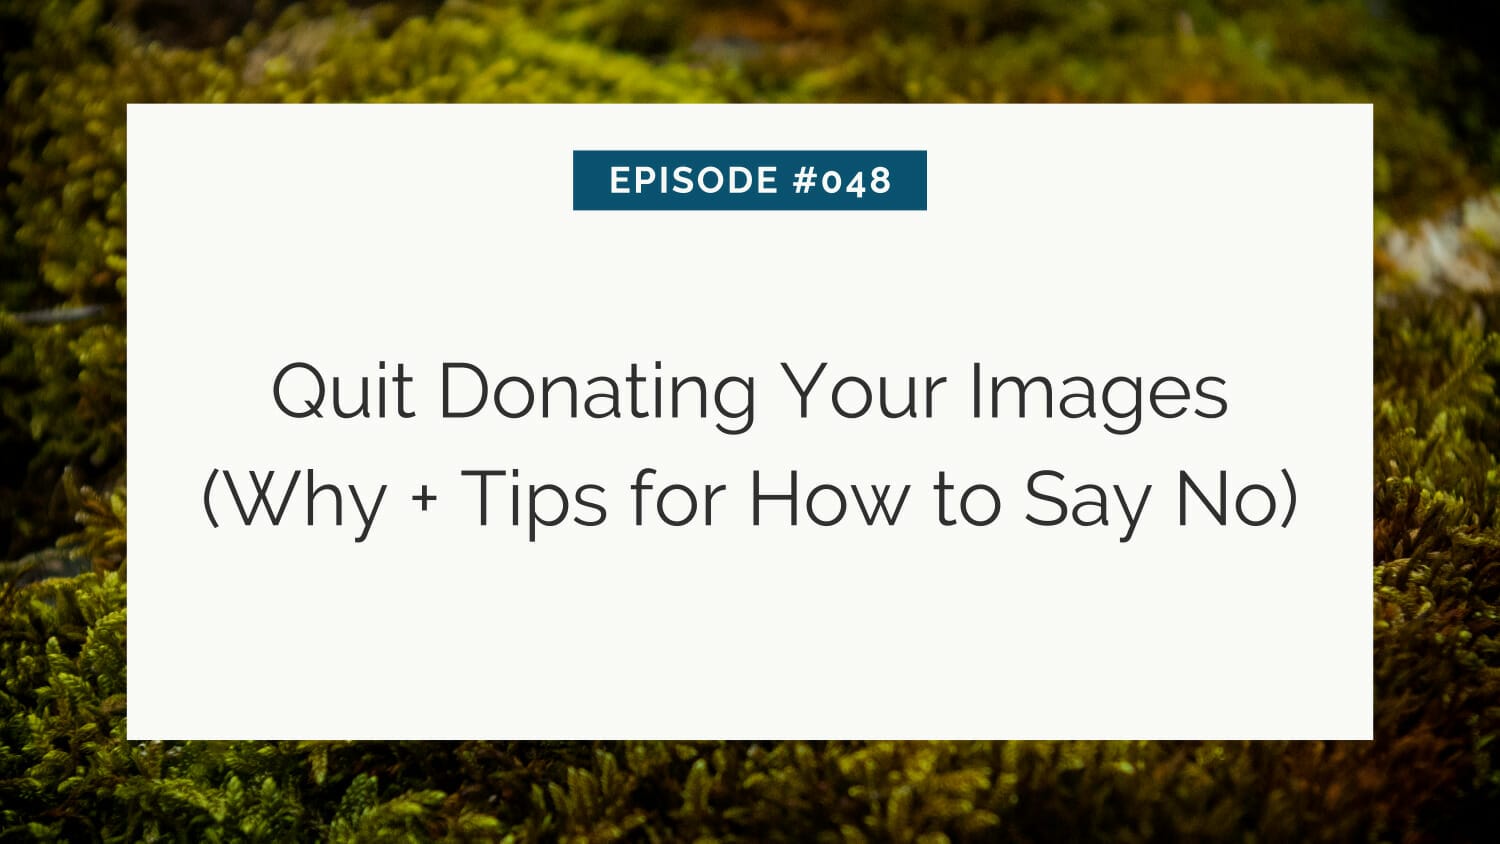 Presentation slide titled "episode #048 - quit donating your images (why + tips for how to say no)" over a mossy background.